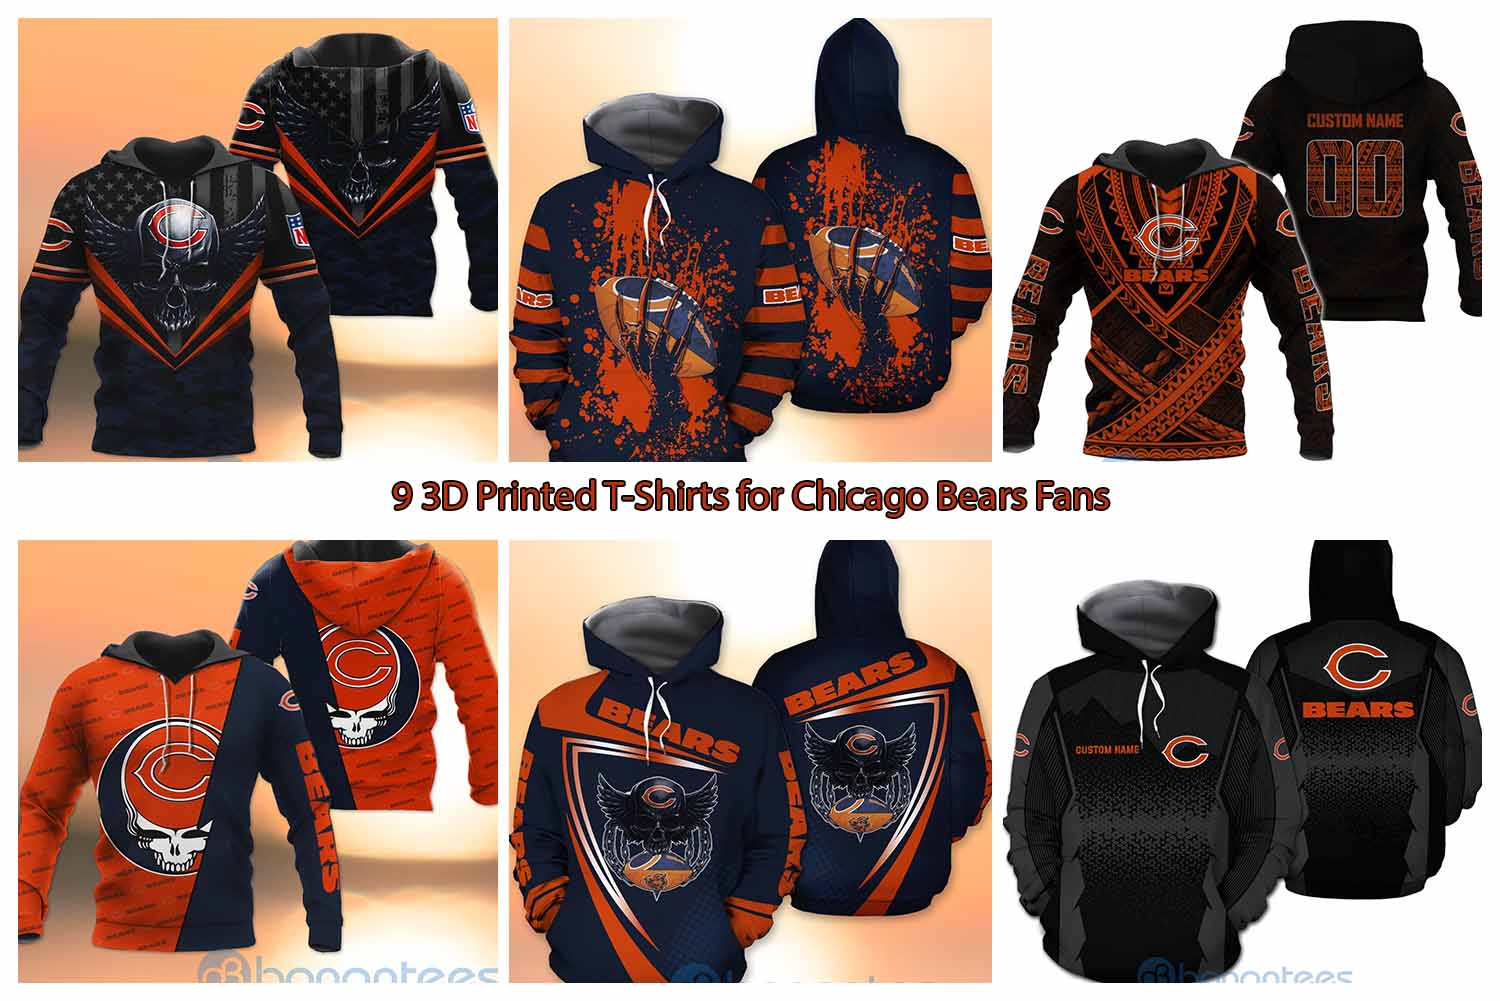 9 3D Printed T-Shirts for Chicago Bears Fans